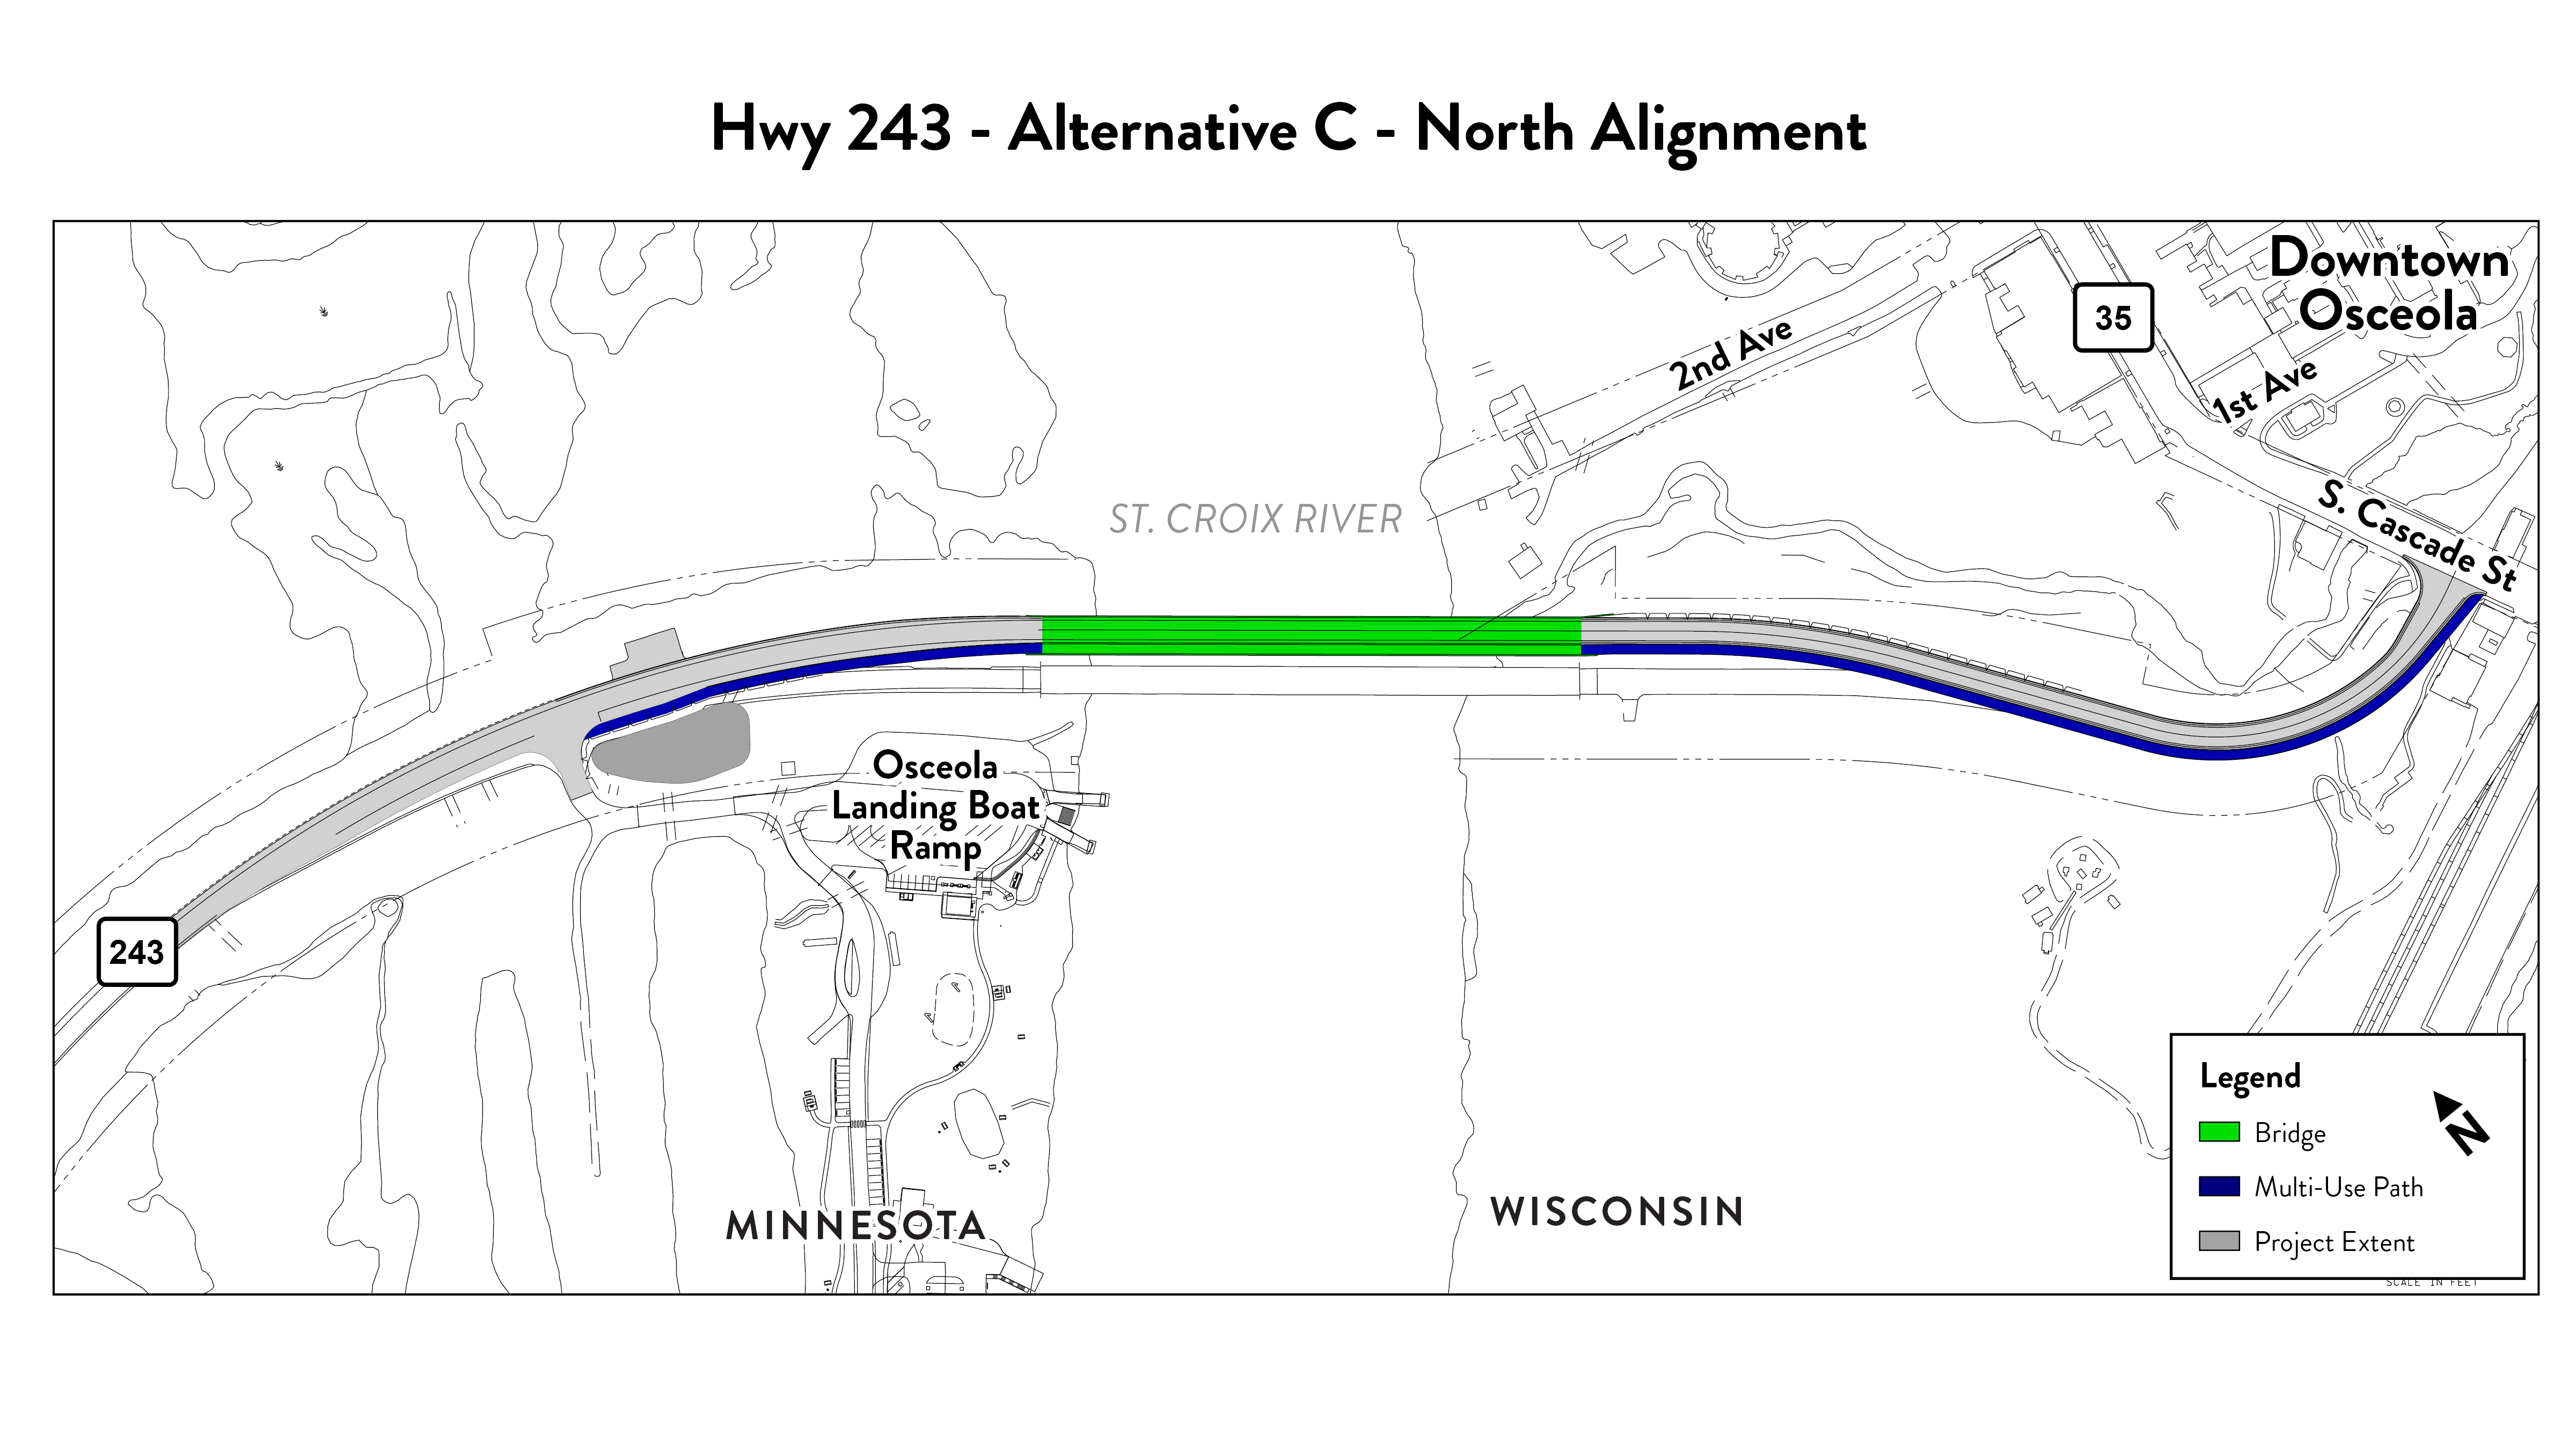 Shows alternative C, including construction limits, proposed and existing road, and path for people walking or biking.